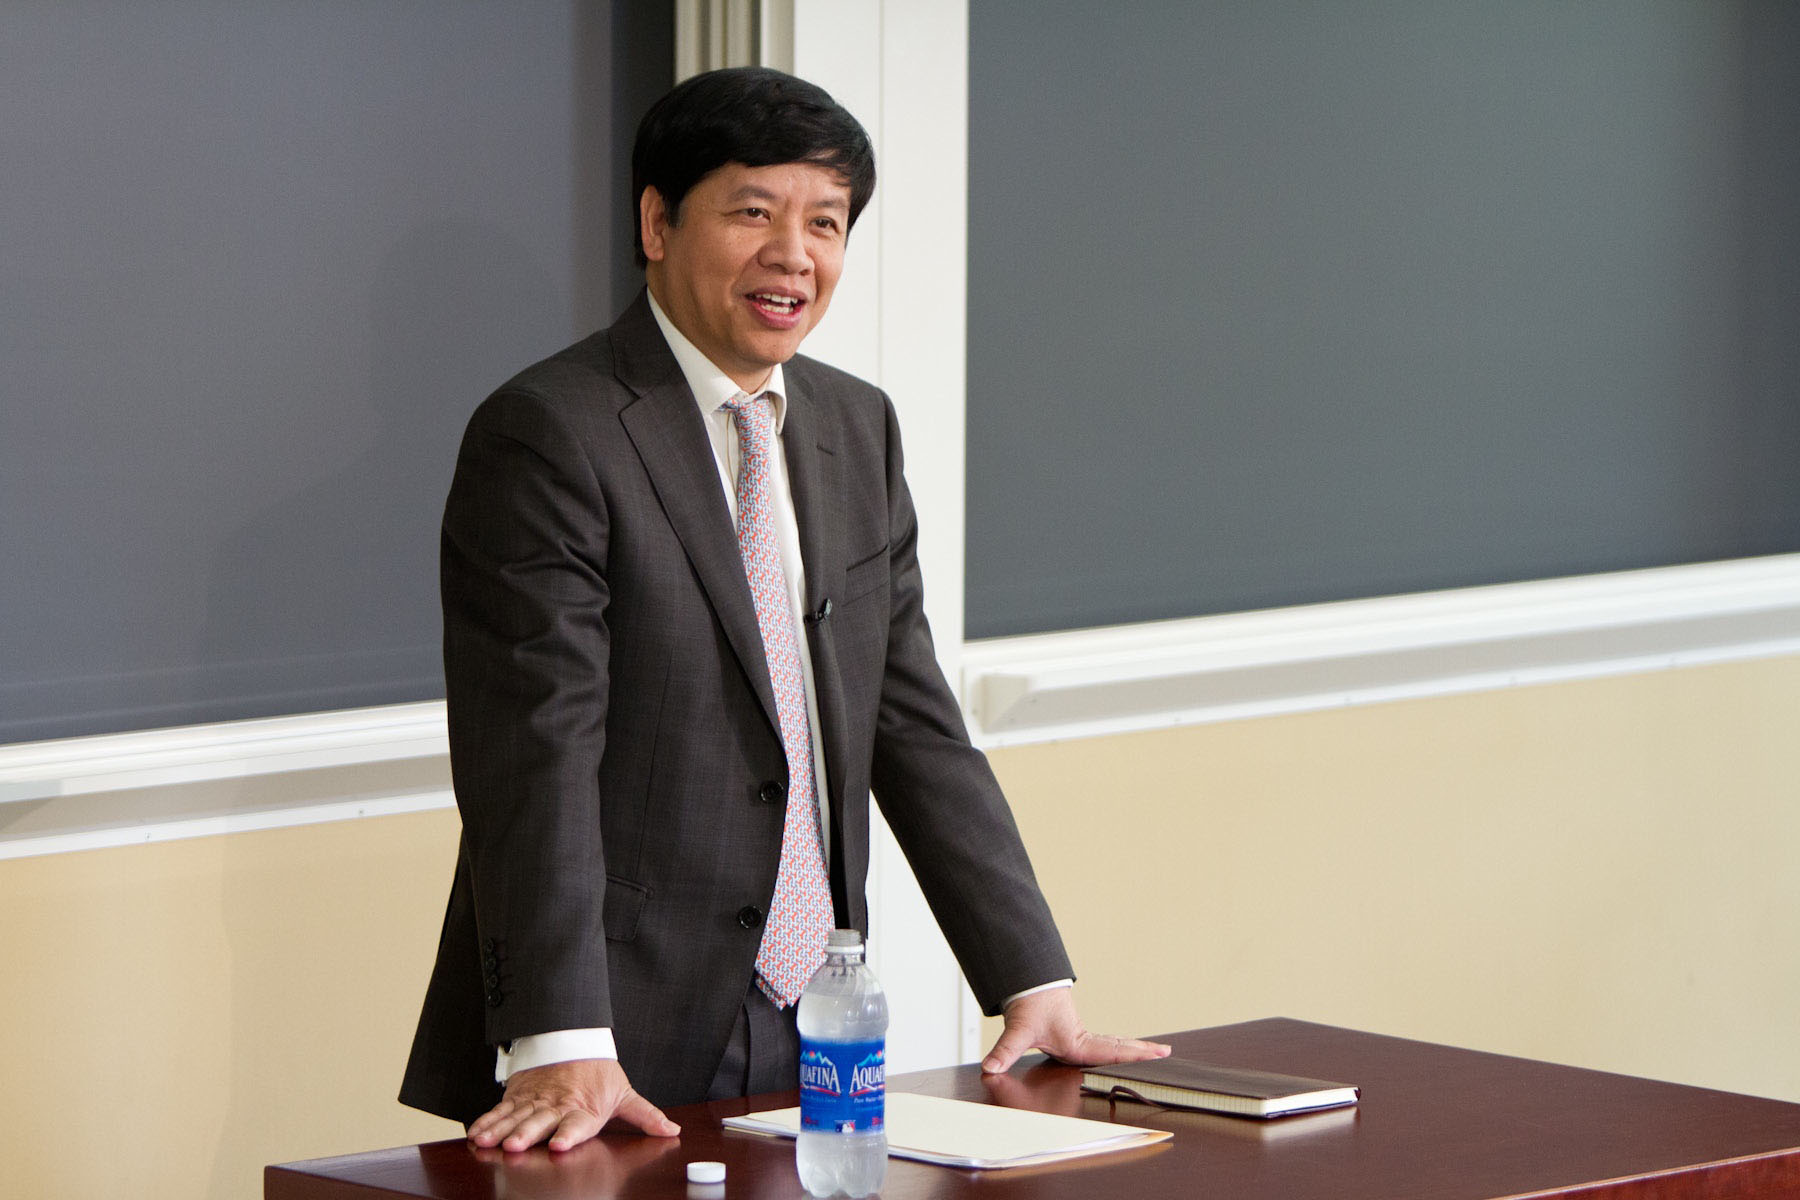 Nguyen Quoc Cuong speaking to a class from a desk